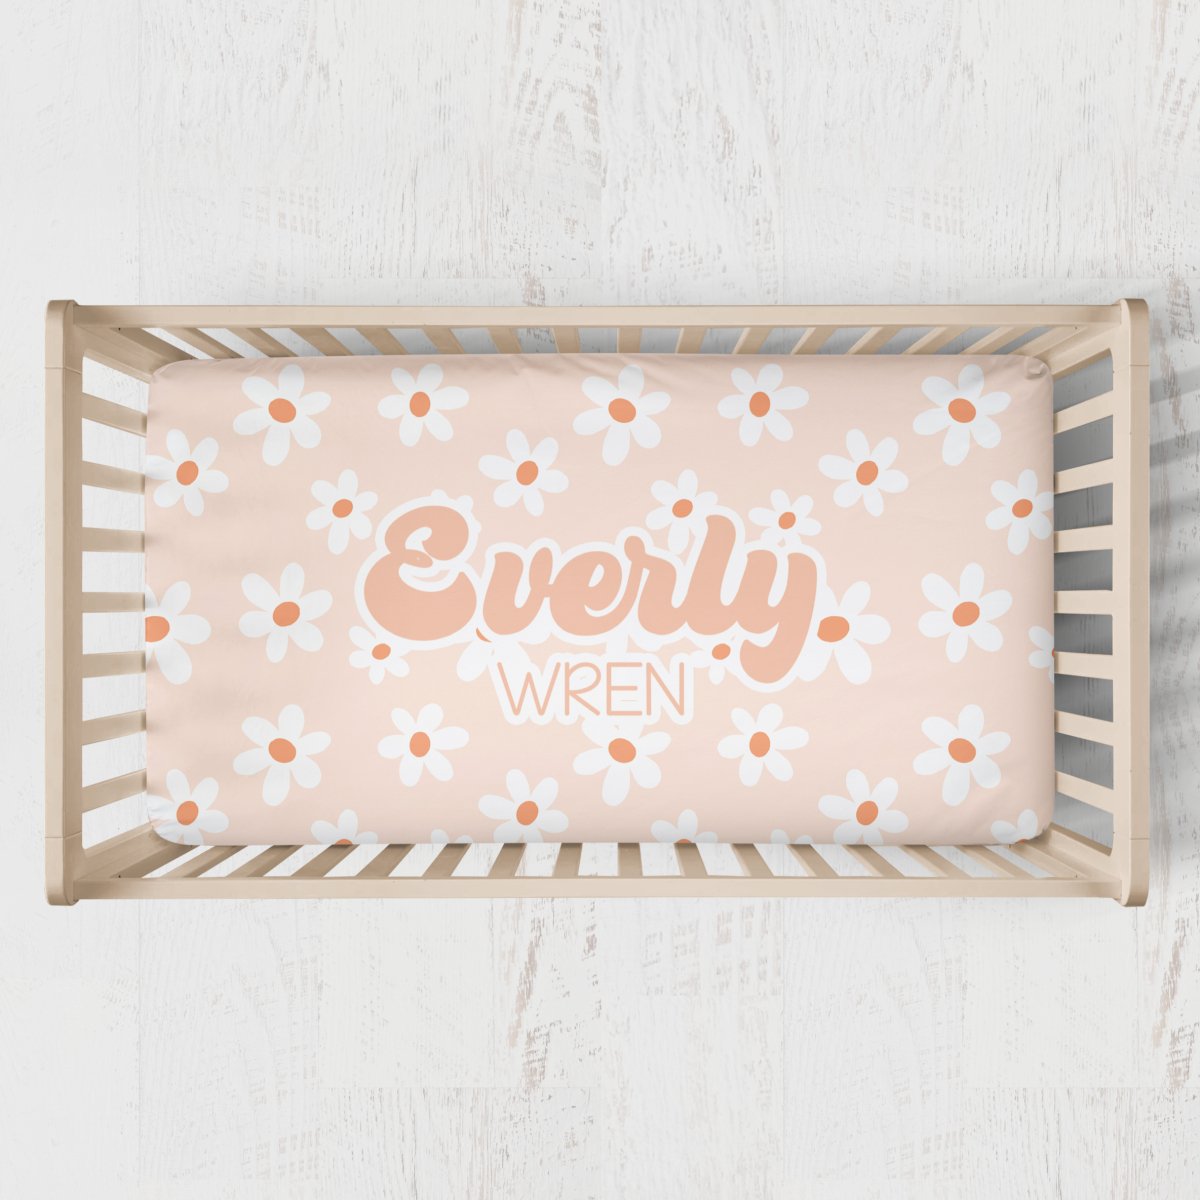 Daisy Personalized Floral Crib Sheet - Daisy, gender_girl, Personalized_Yes